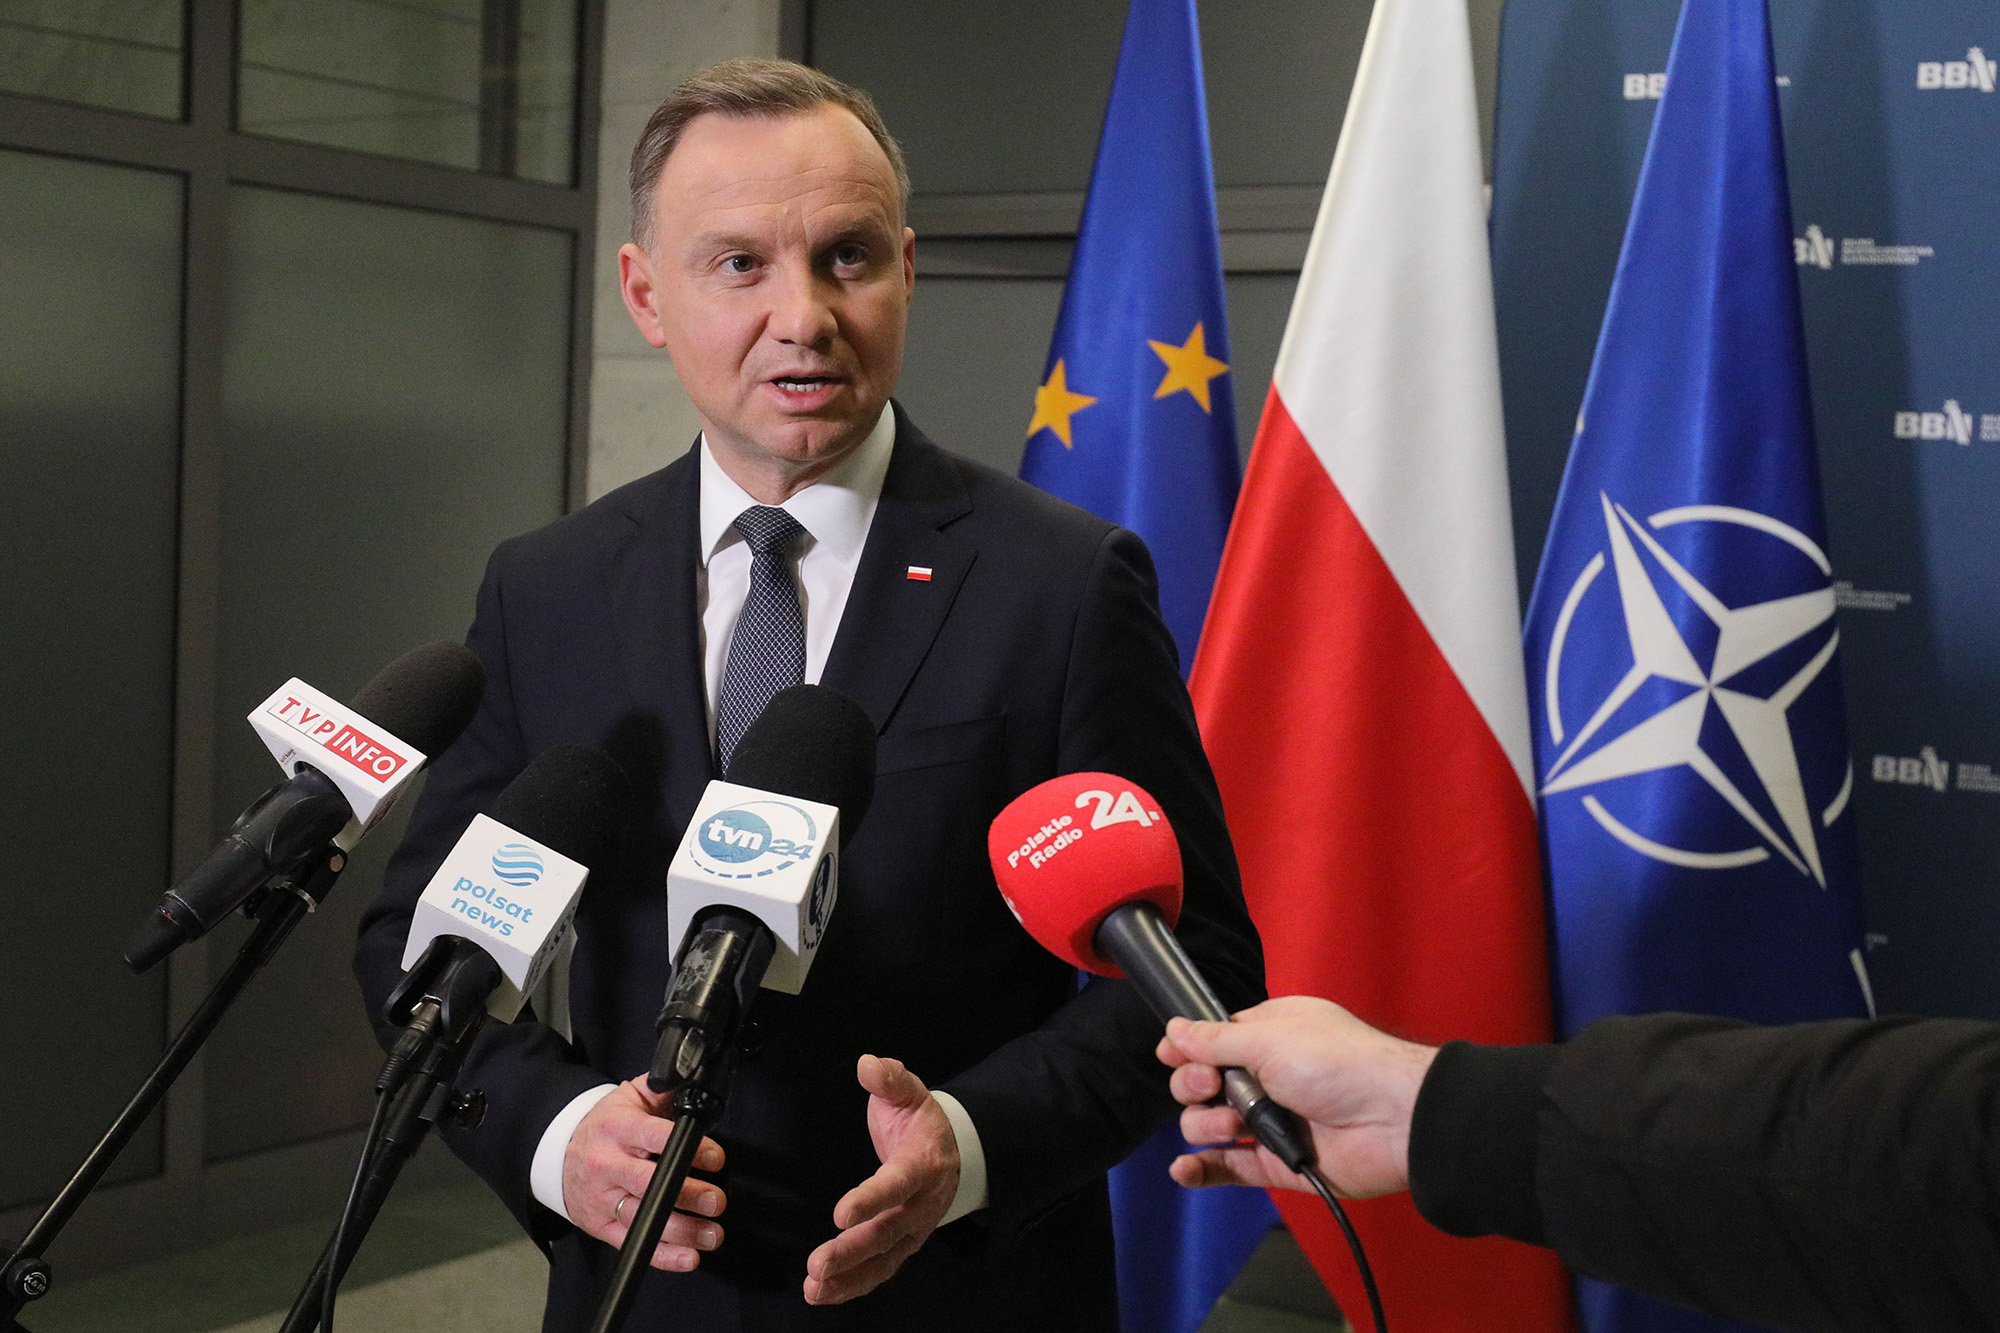 Polish President Andrzej Duda speaks during a news conference at the National Security Bureau headquarters in Warsaw, Poland, on November. 16